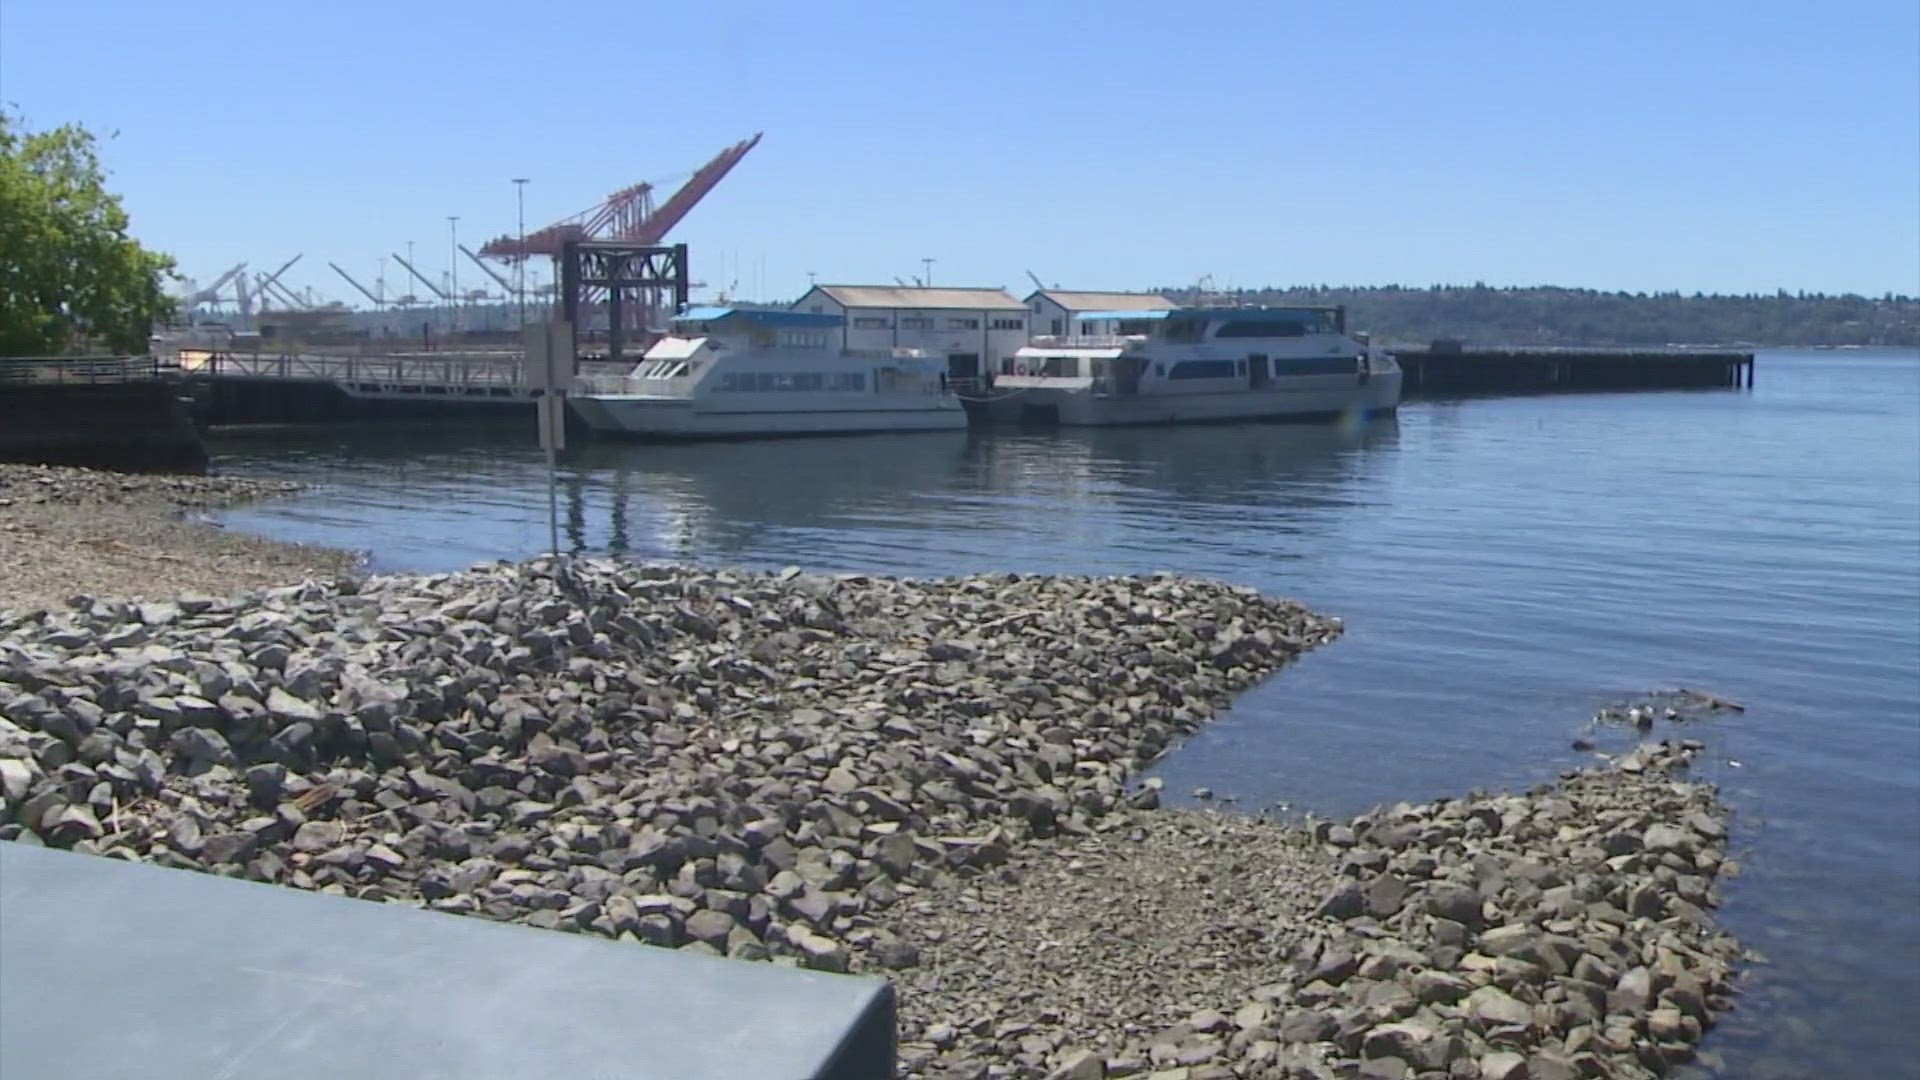 Pioneer Square Habitat Beach aims to improve the ecosystem for fish and other species on the waterfront.